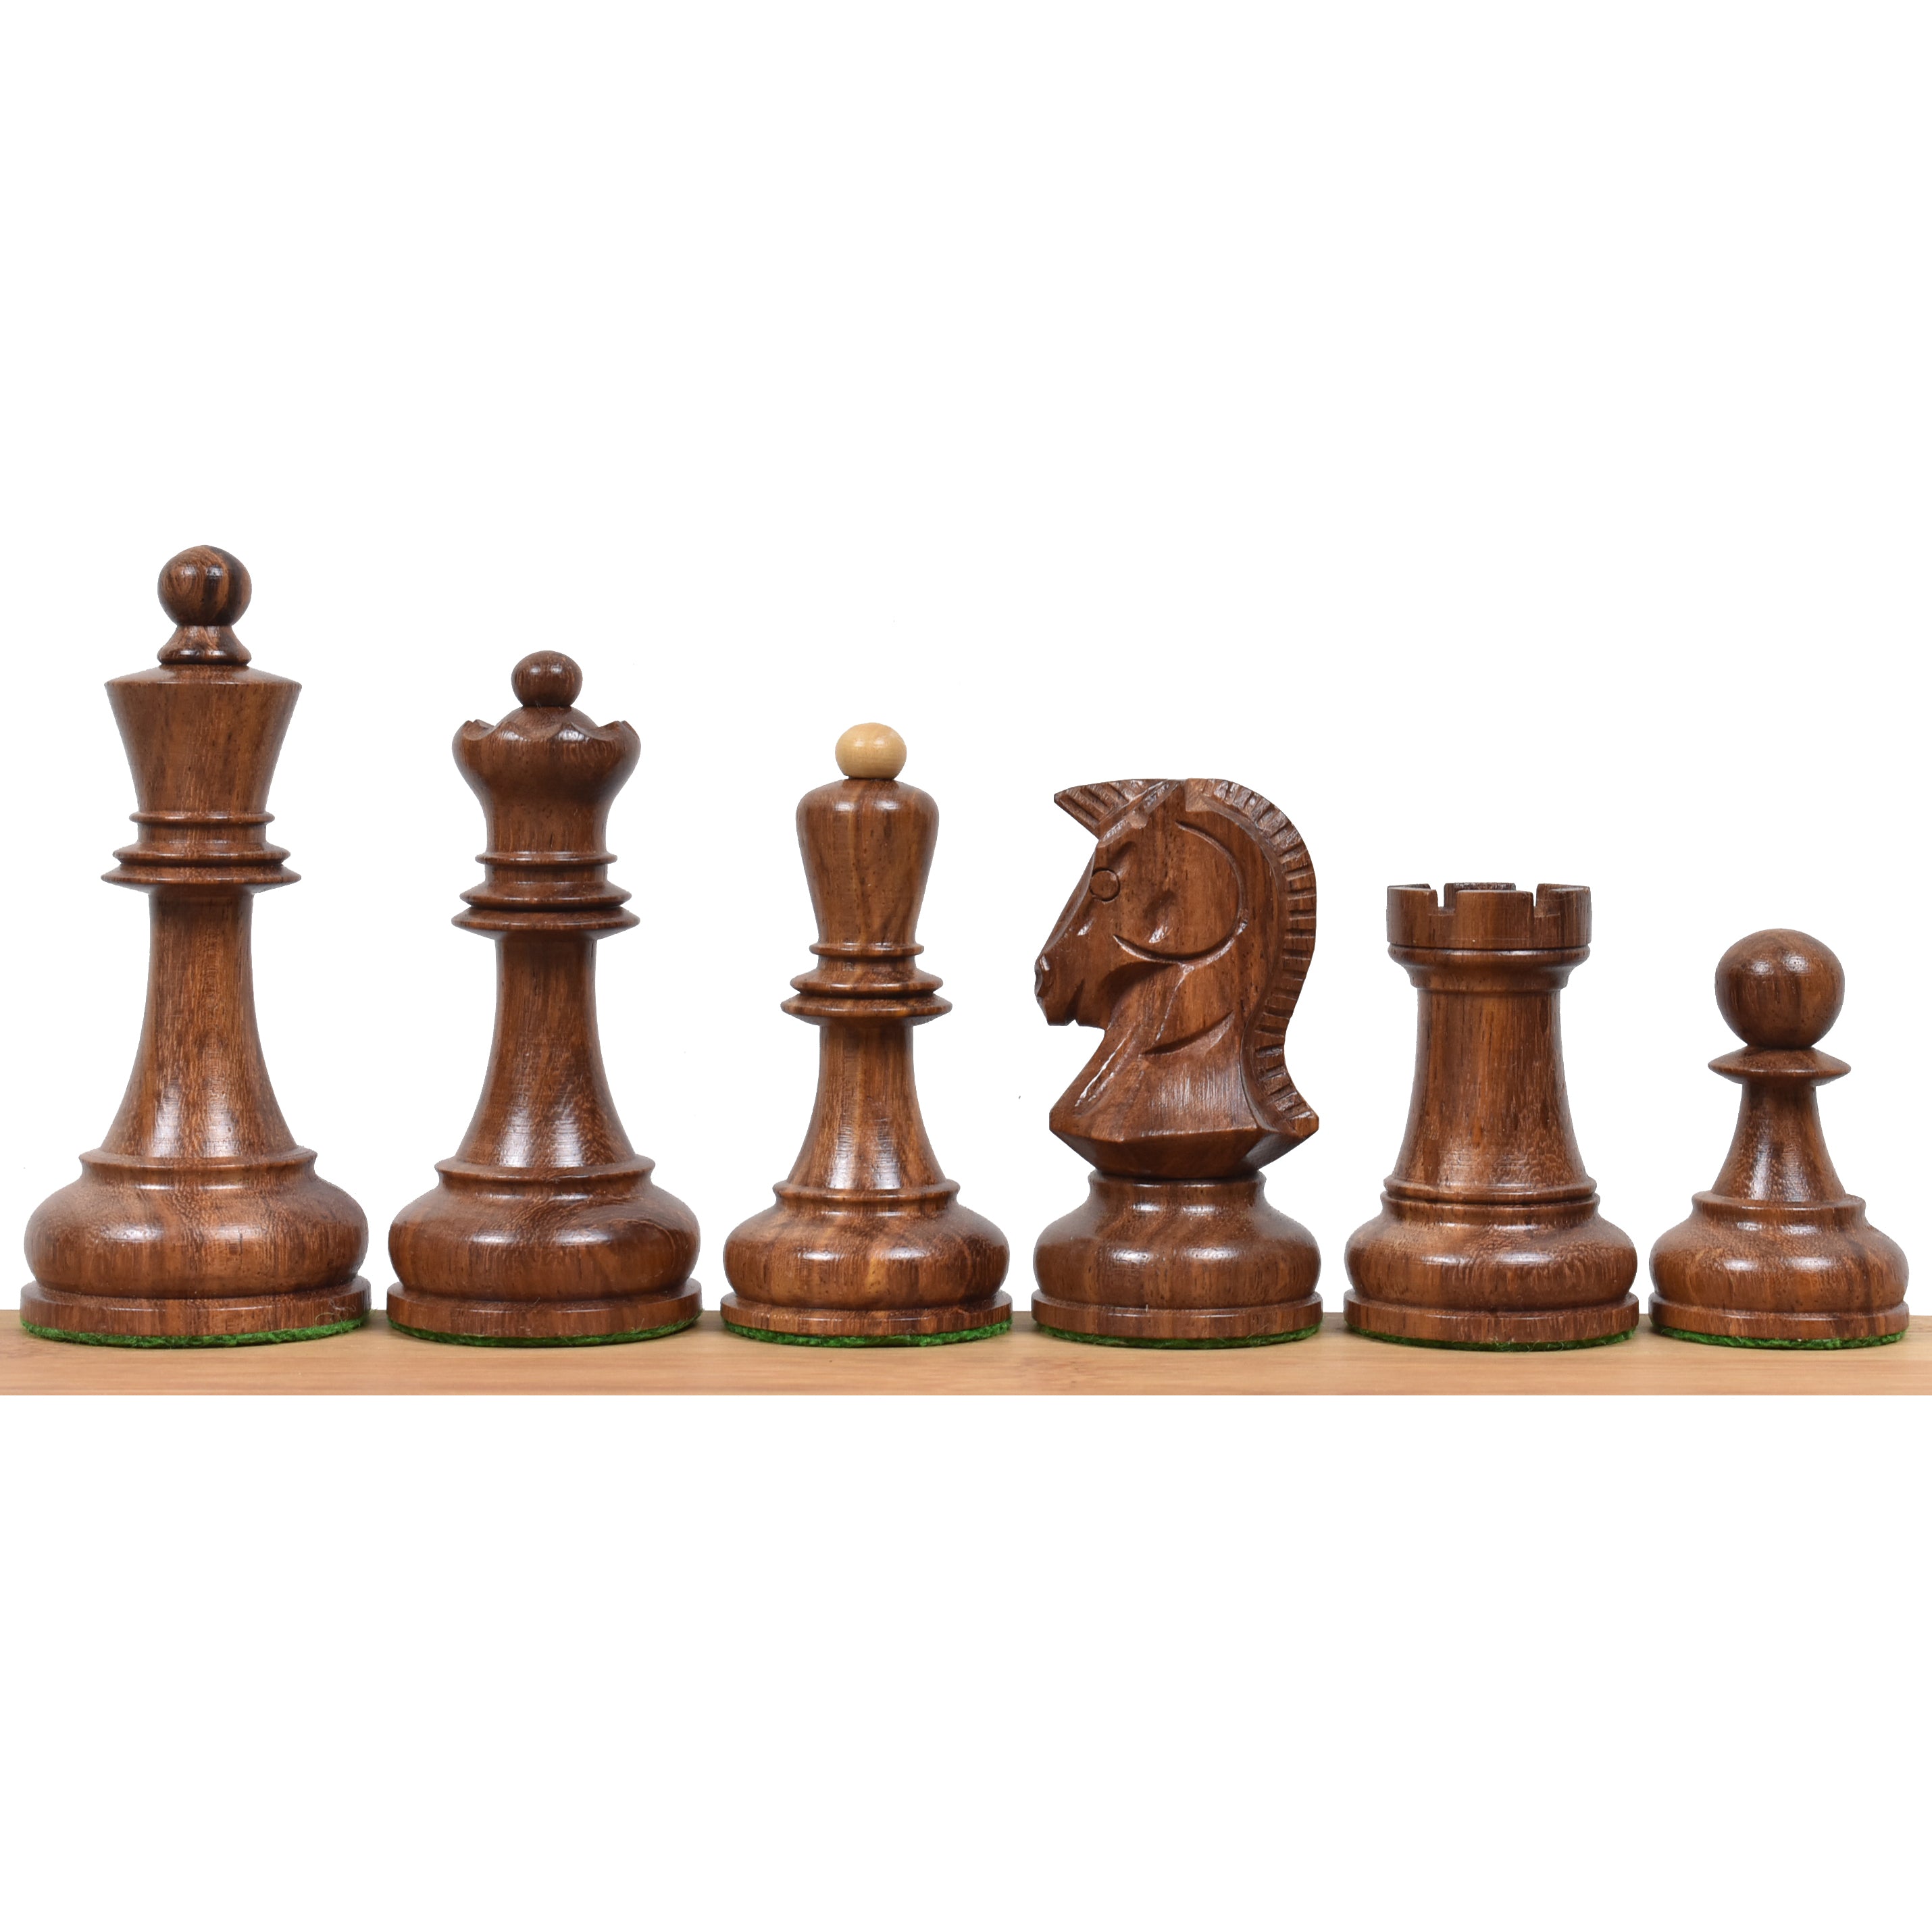 Dubrovnik Repro in Bud Rosewood Weighted Chess Set in Version 3.0